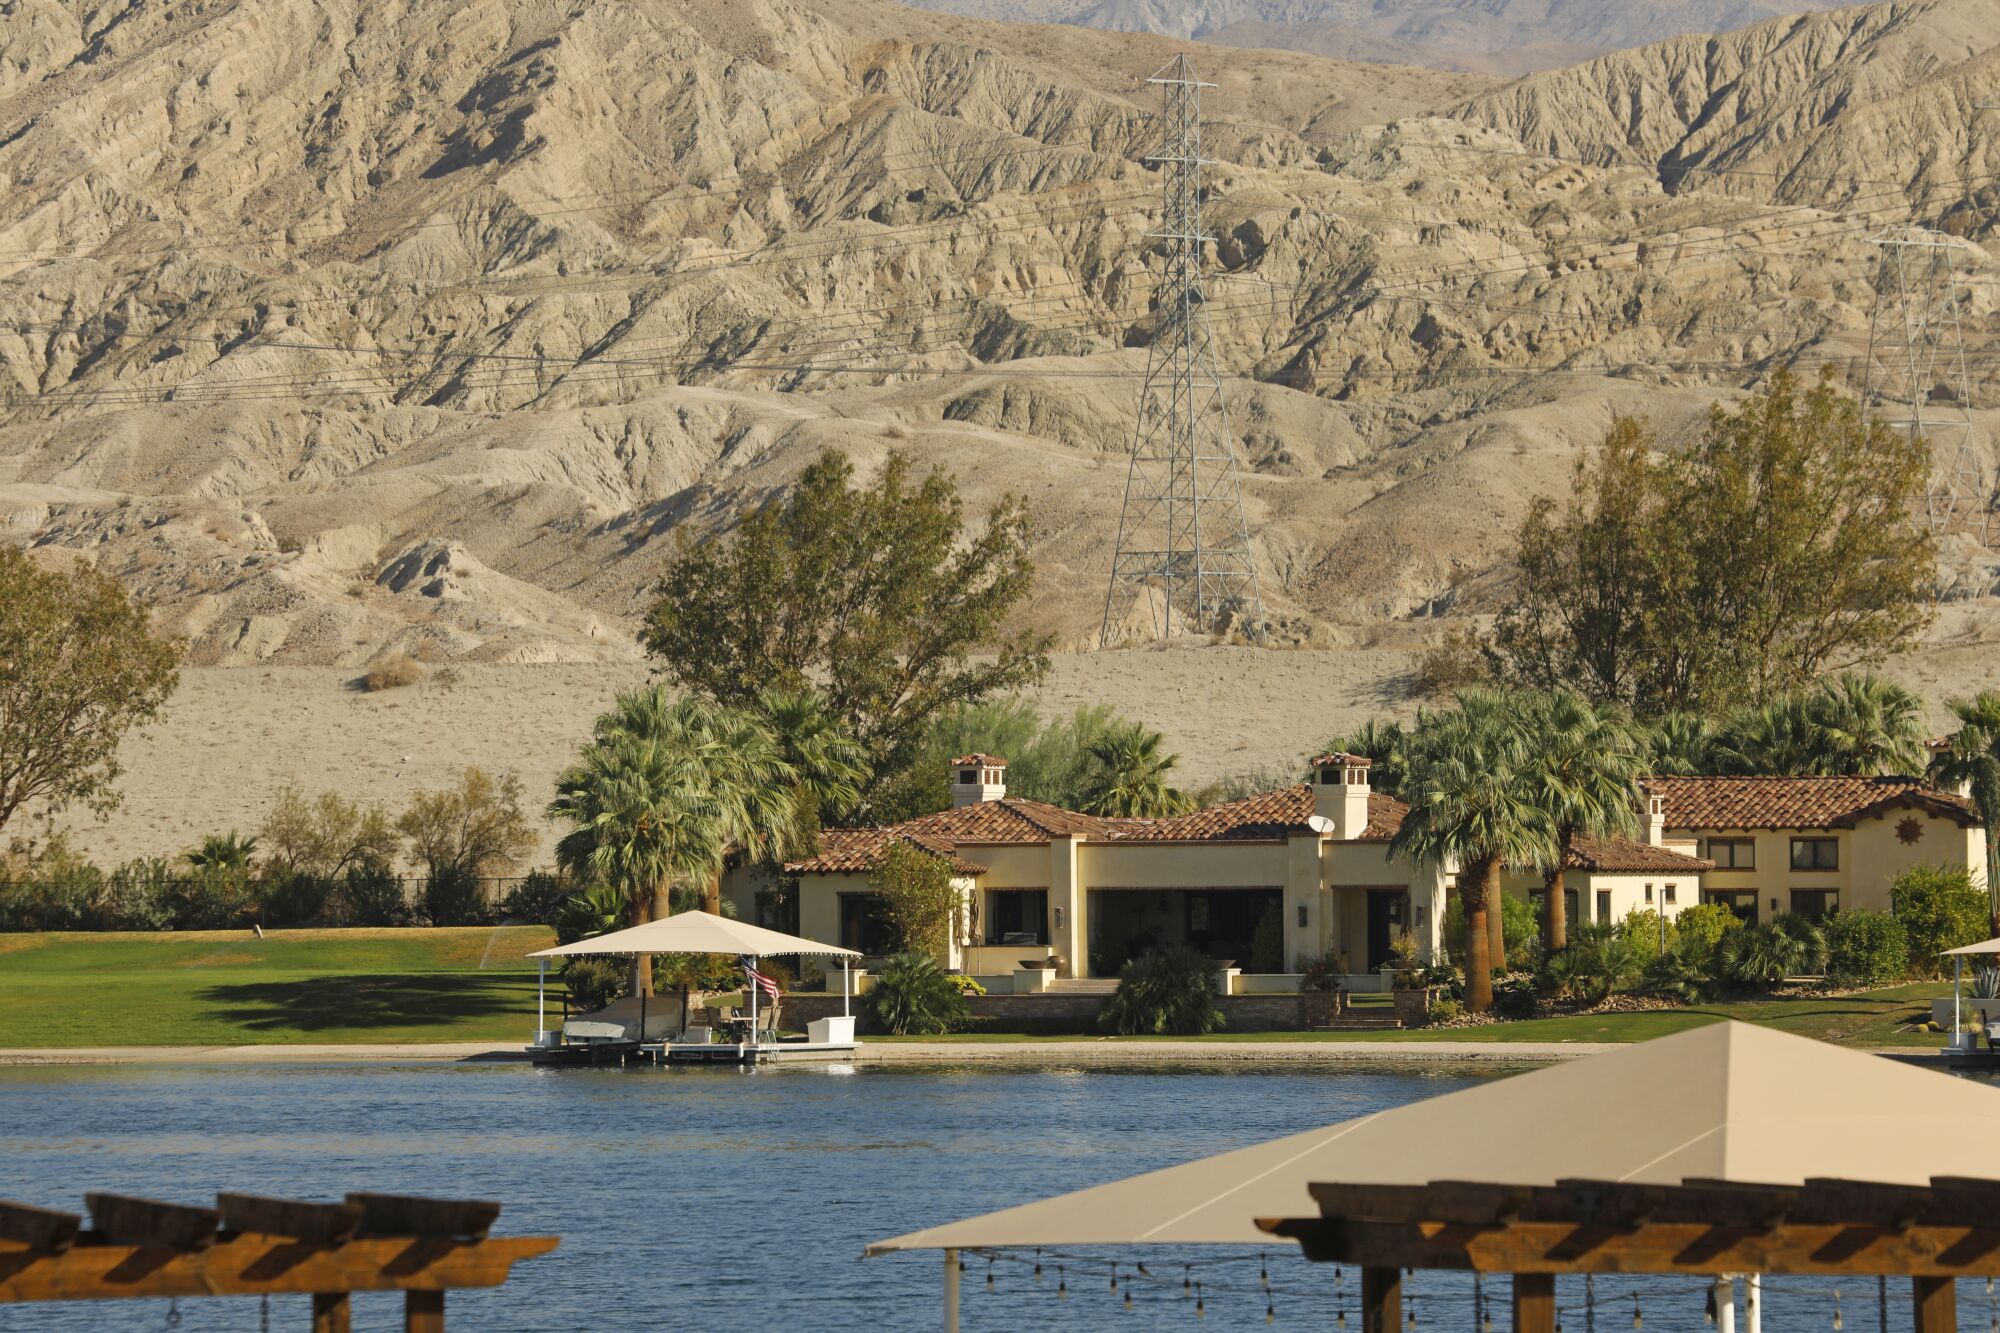 Houses by an artificial lake next to desert mountains.